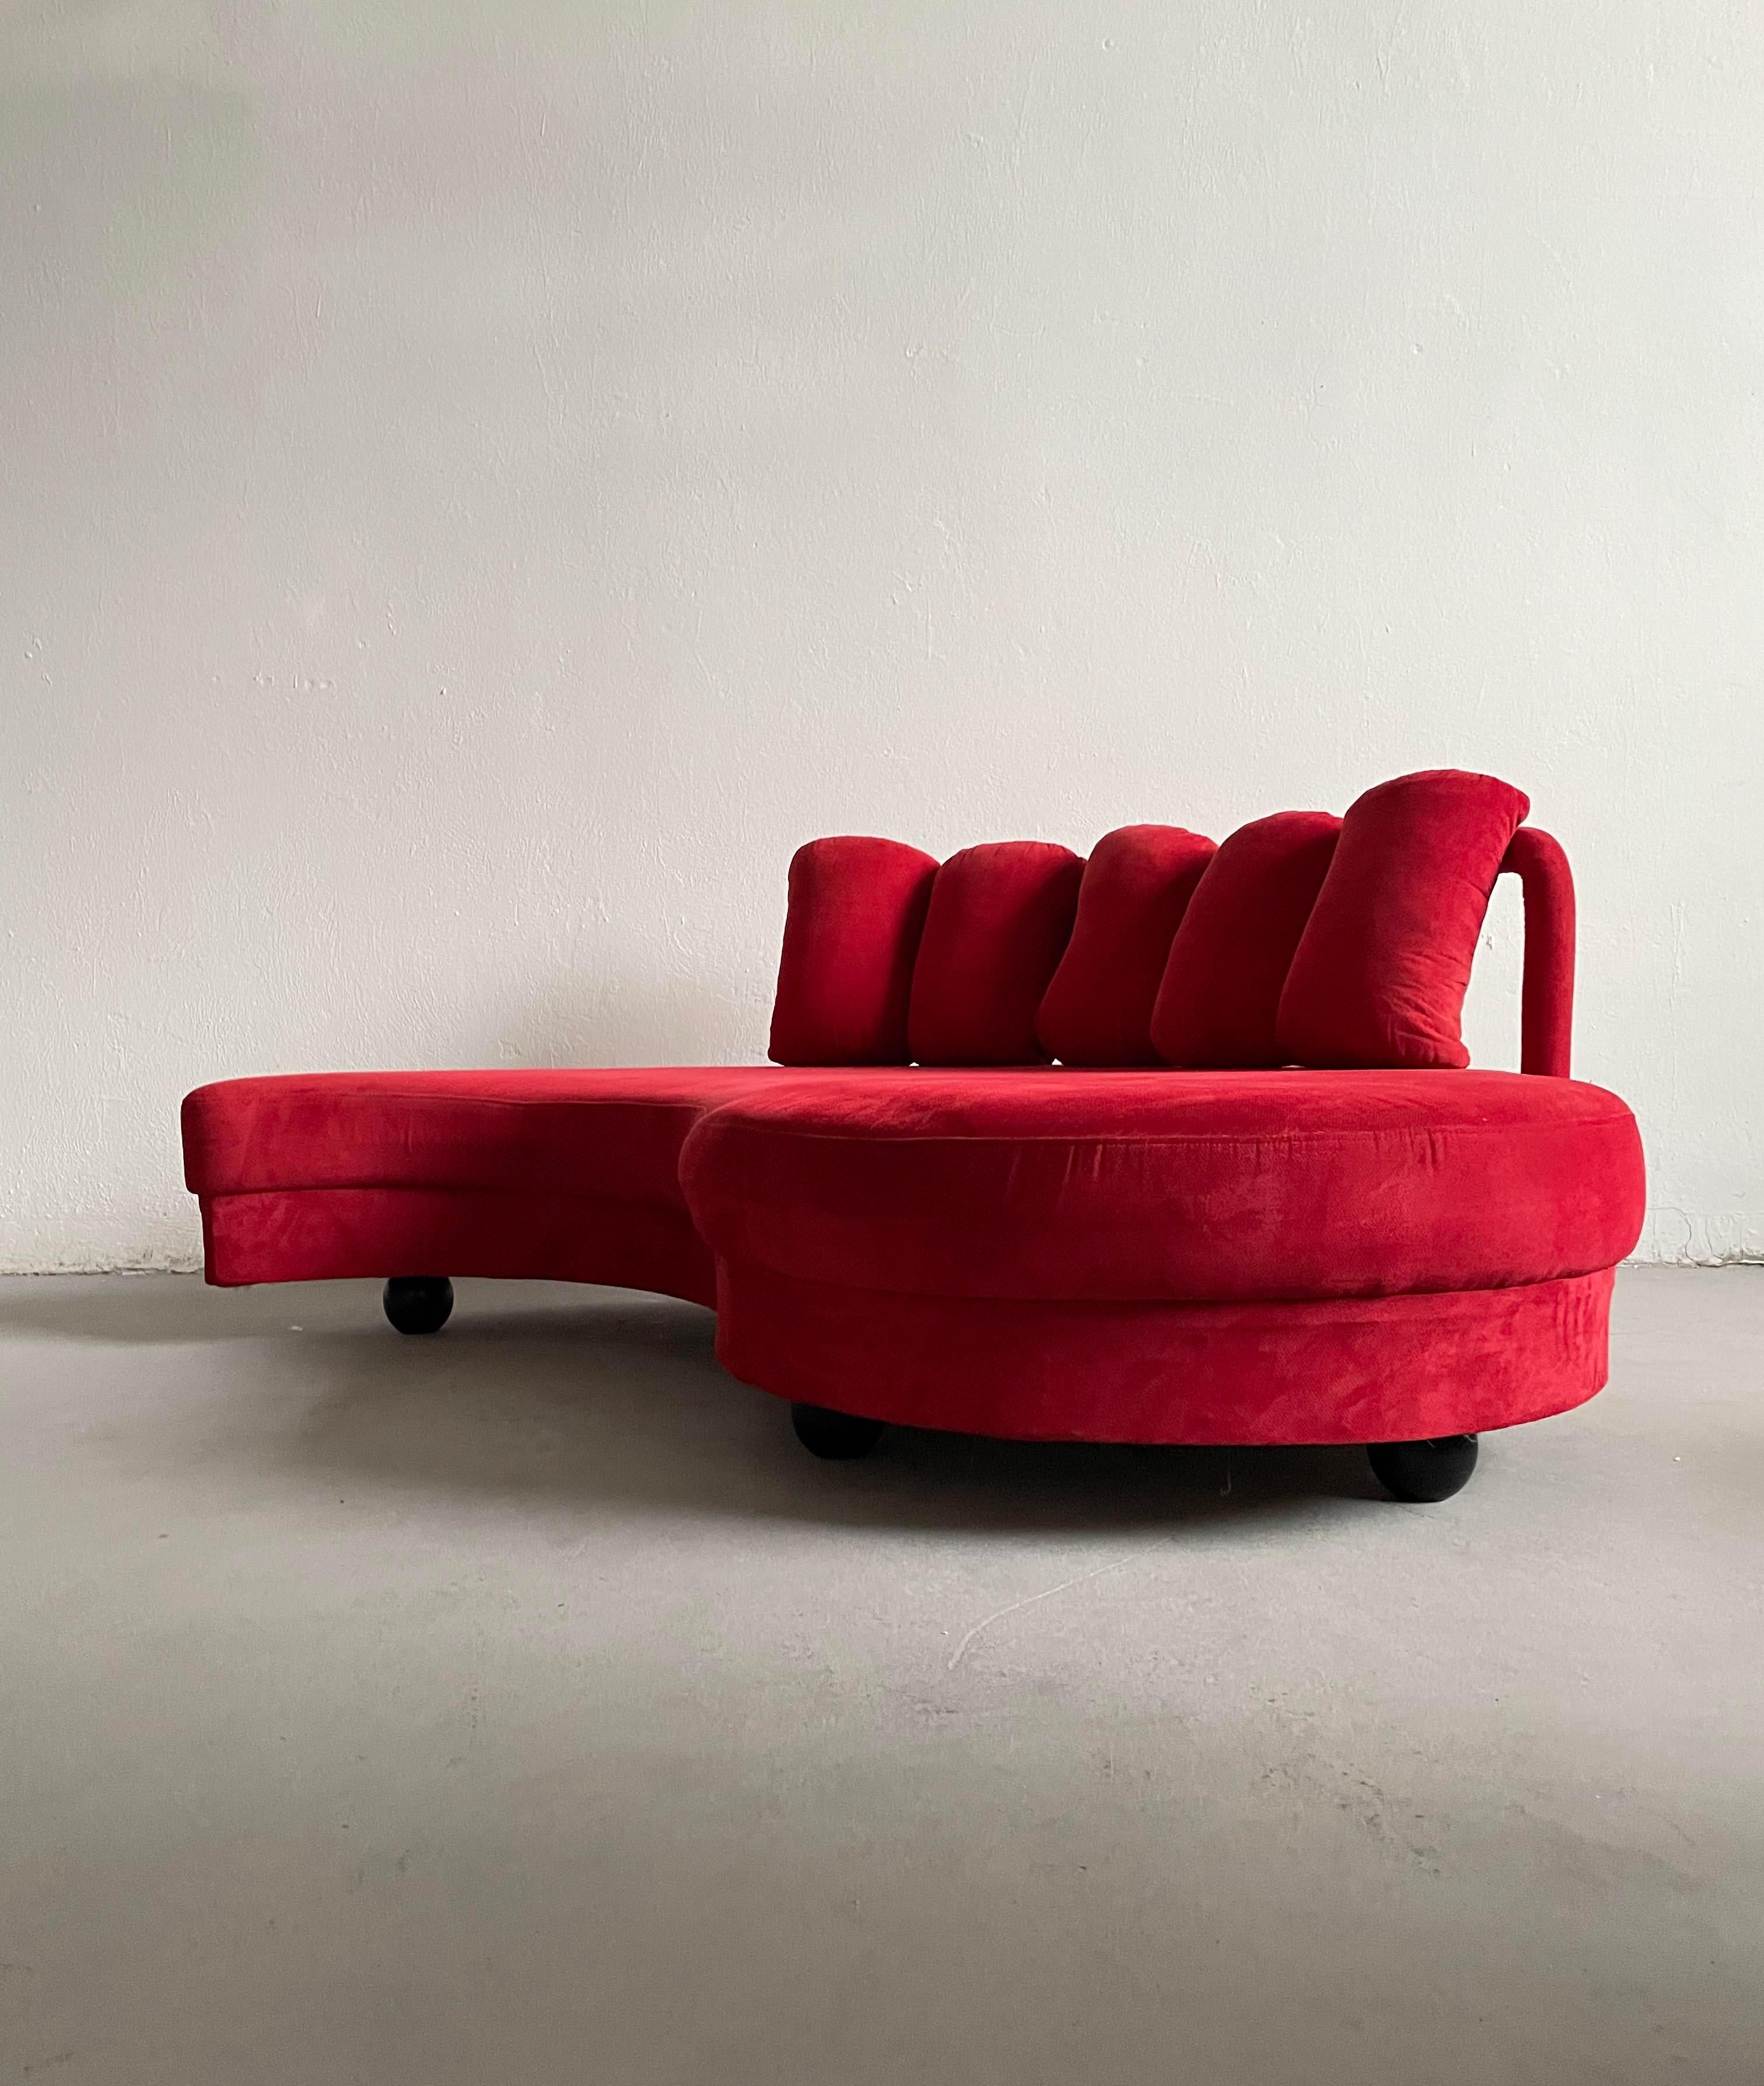 Set of 2 Postmodern Curved Yin-Yang Shaped Sofa Daybeds in Red Fabric, c 1980s For Sale 4